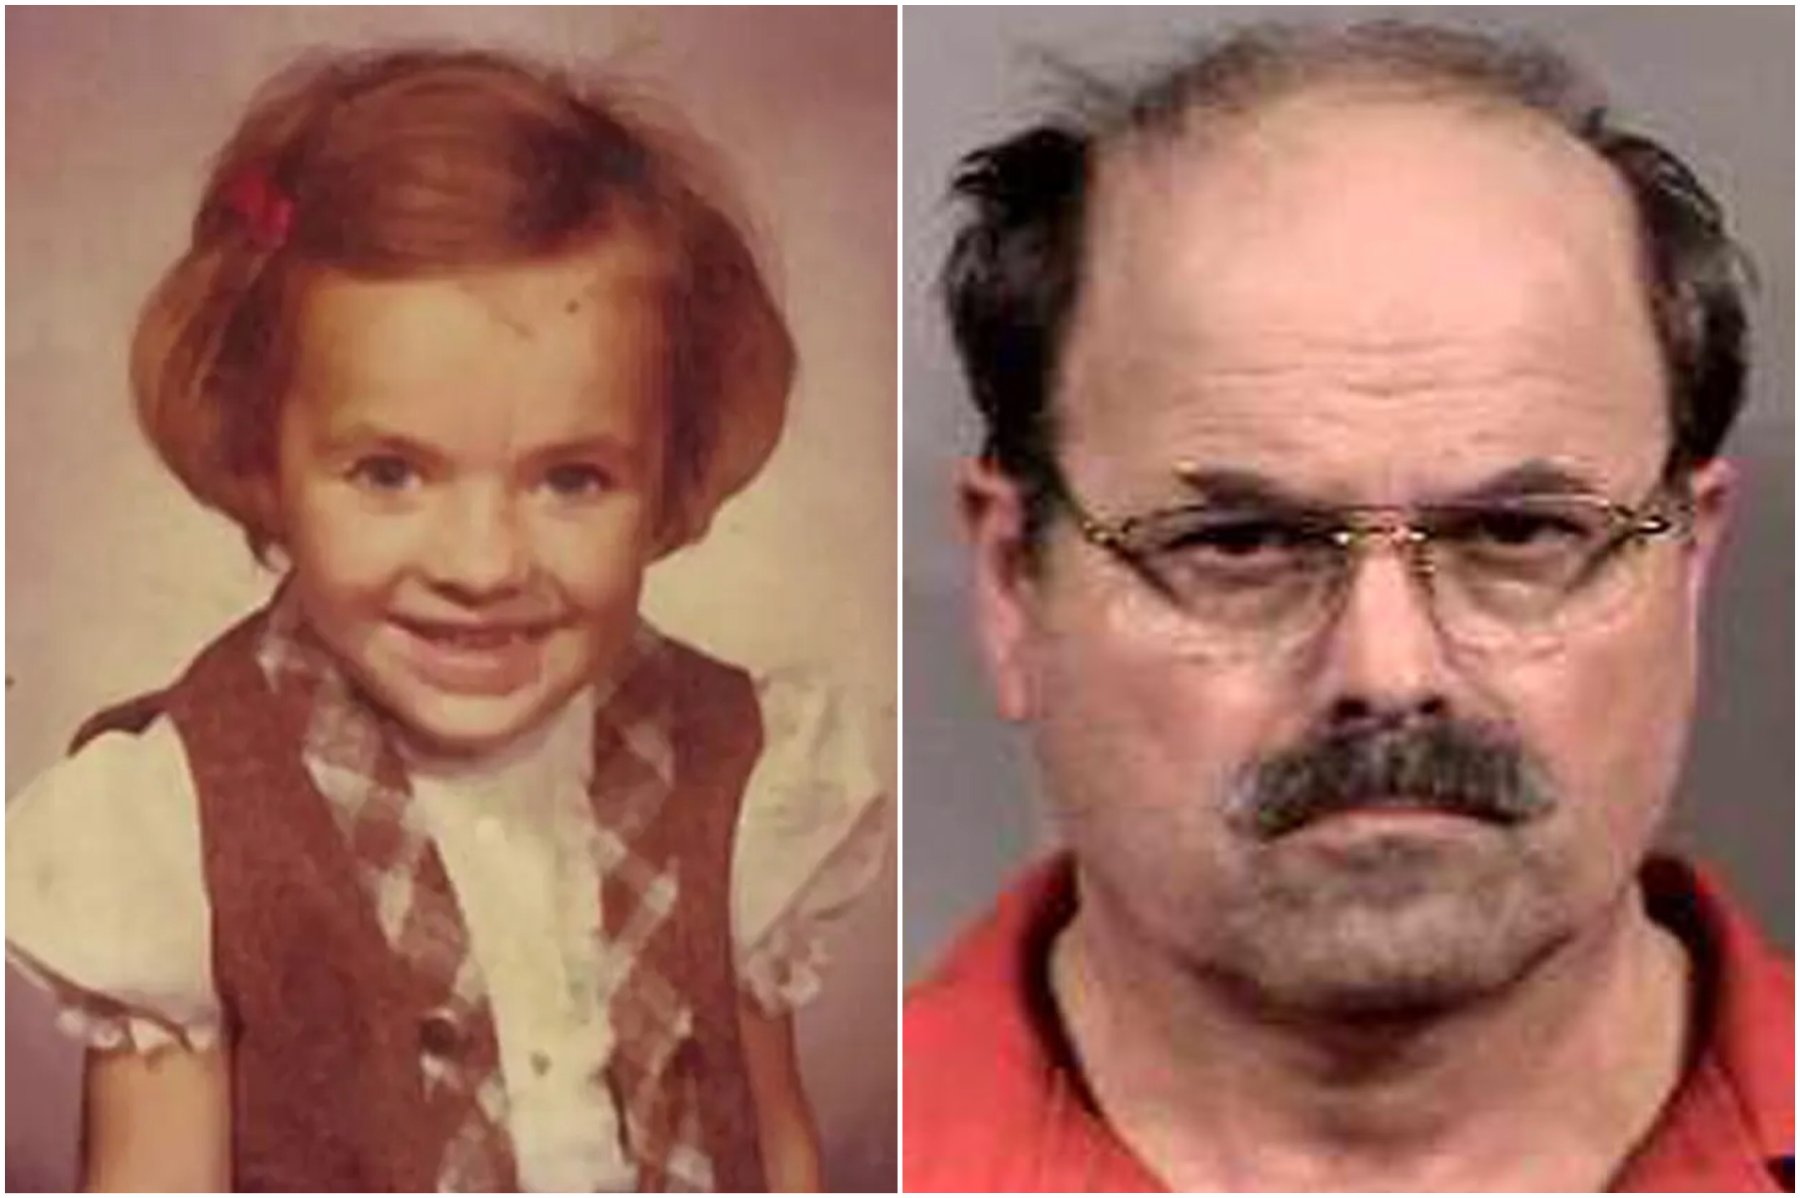 Shawna Garber as a child and Dennis Rader, who was questioned in her 1990 murder